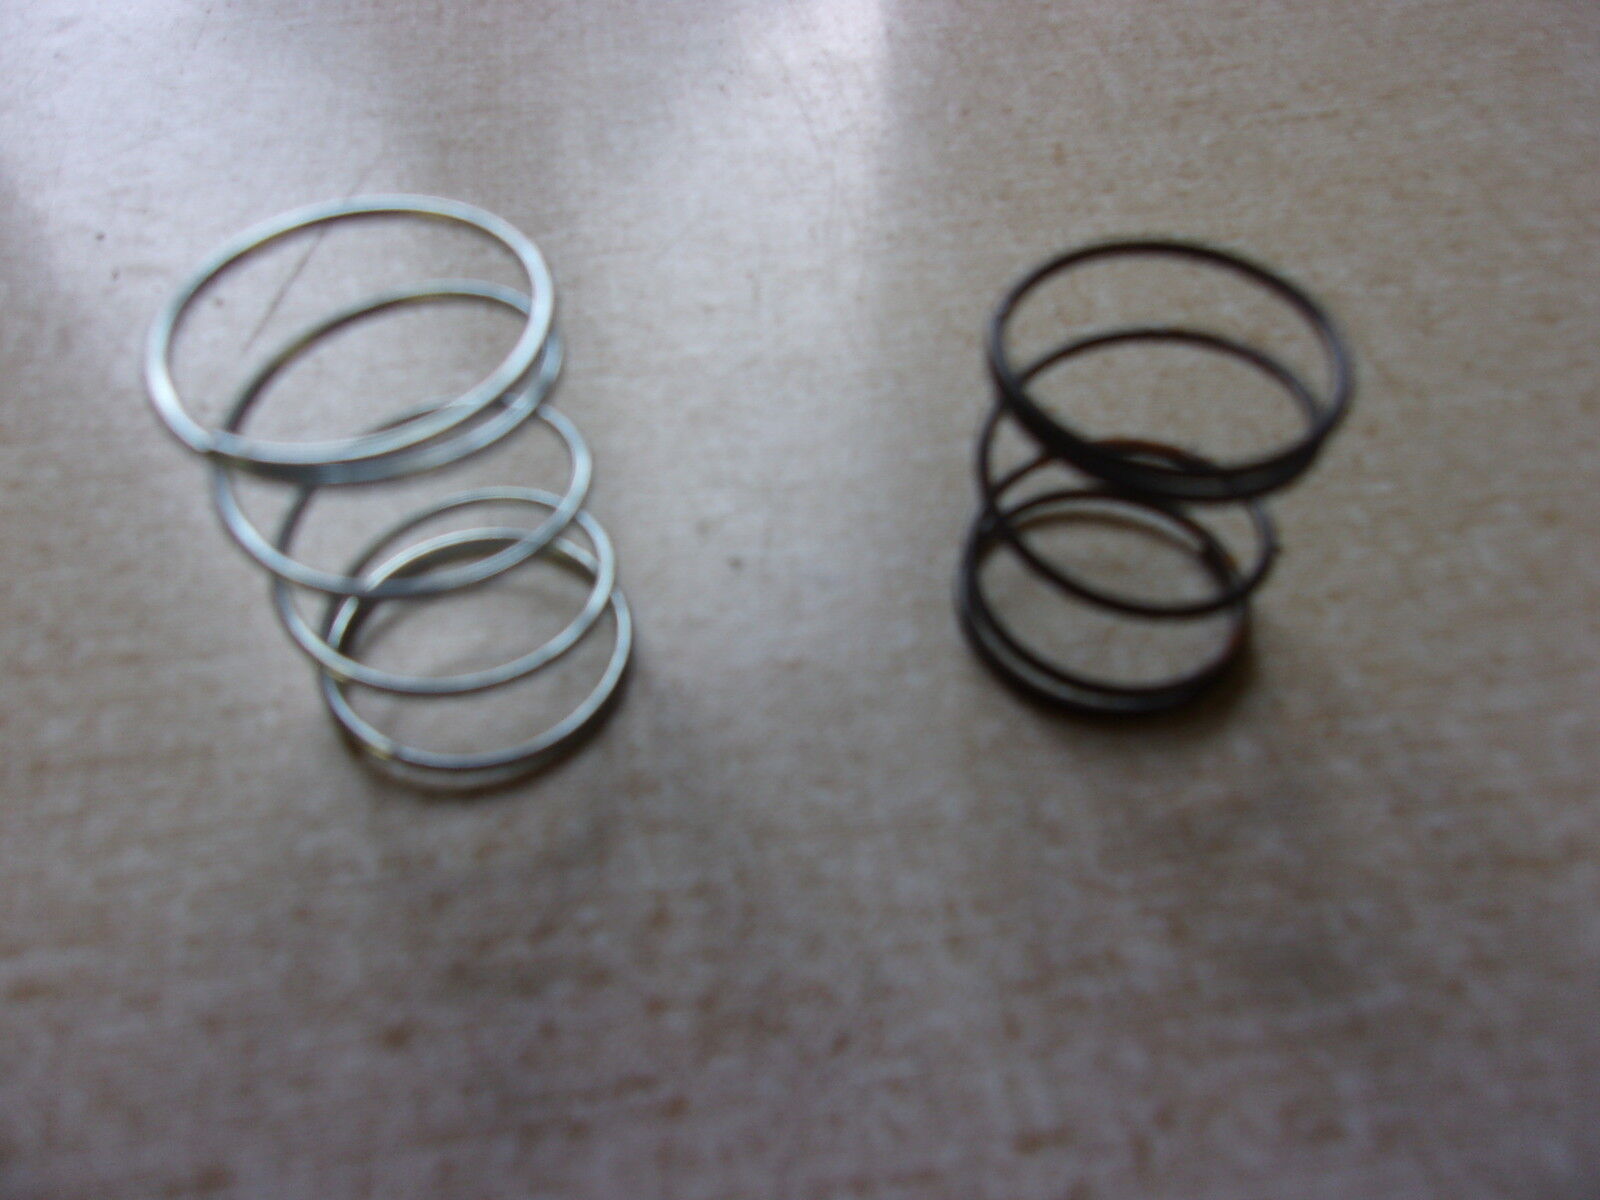 NEW Toro 17-4490, Lot of 2 Lawnmower Springs *FREE SHIPPING*